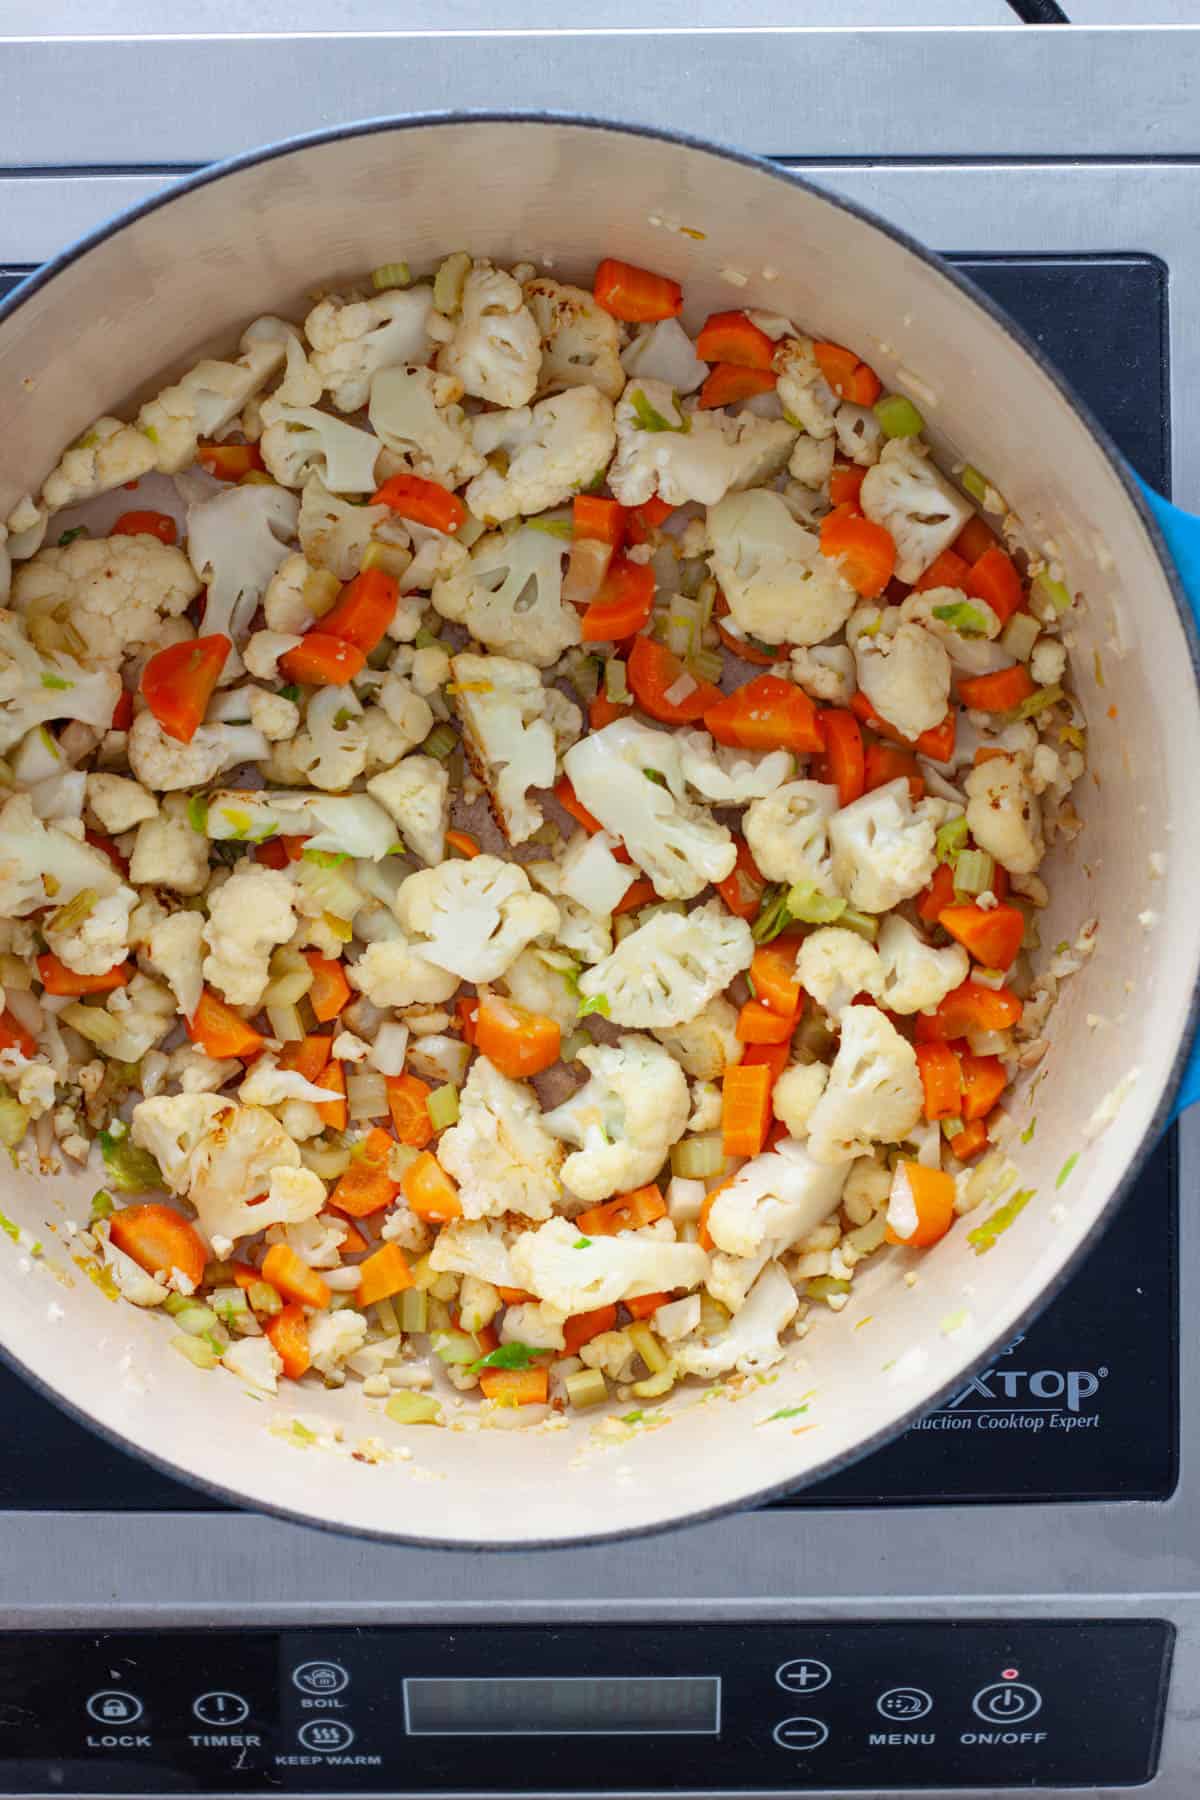 Cauliflower and other vegetables cooking in a large Dutch oven pot.